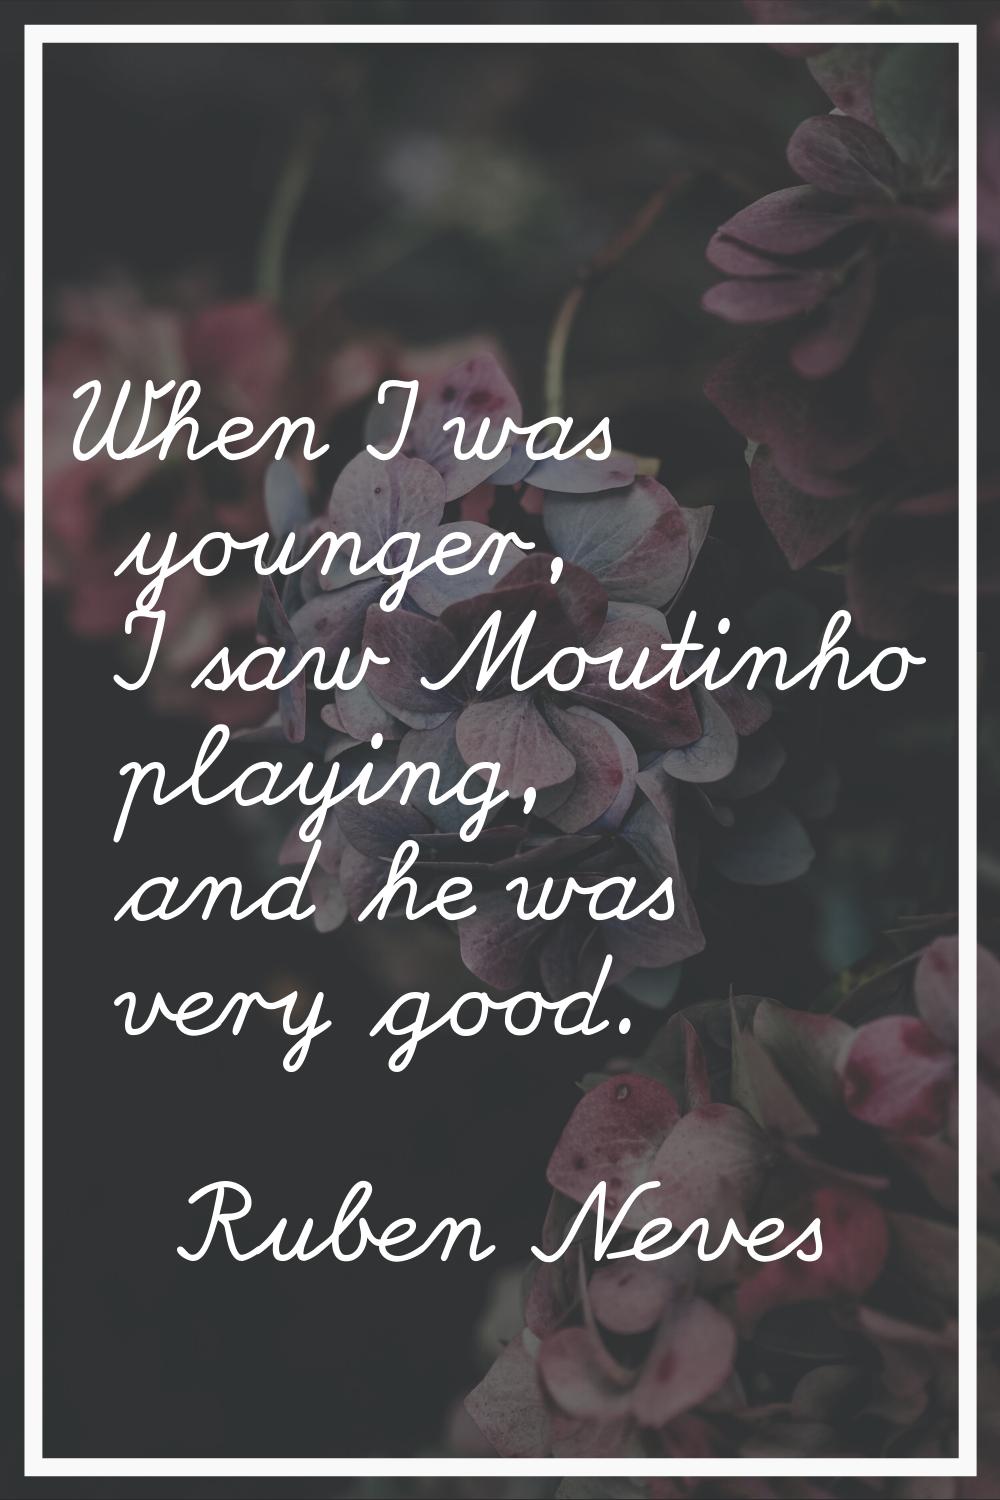 When I was younger, I saw Moutinho playing, and he was very good.